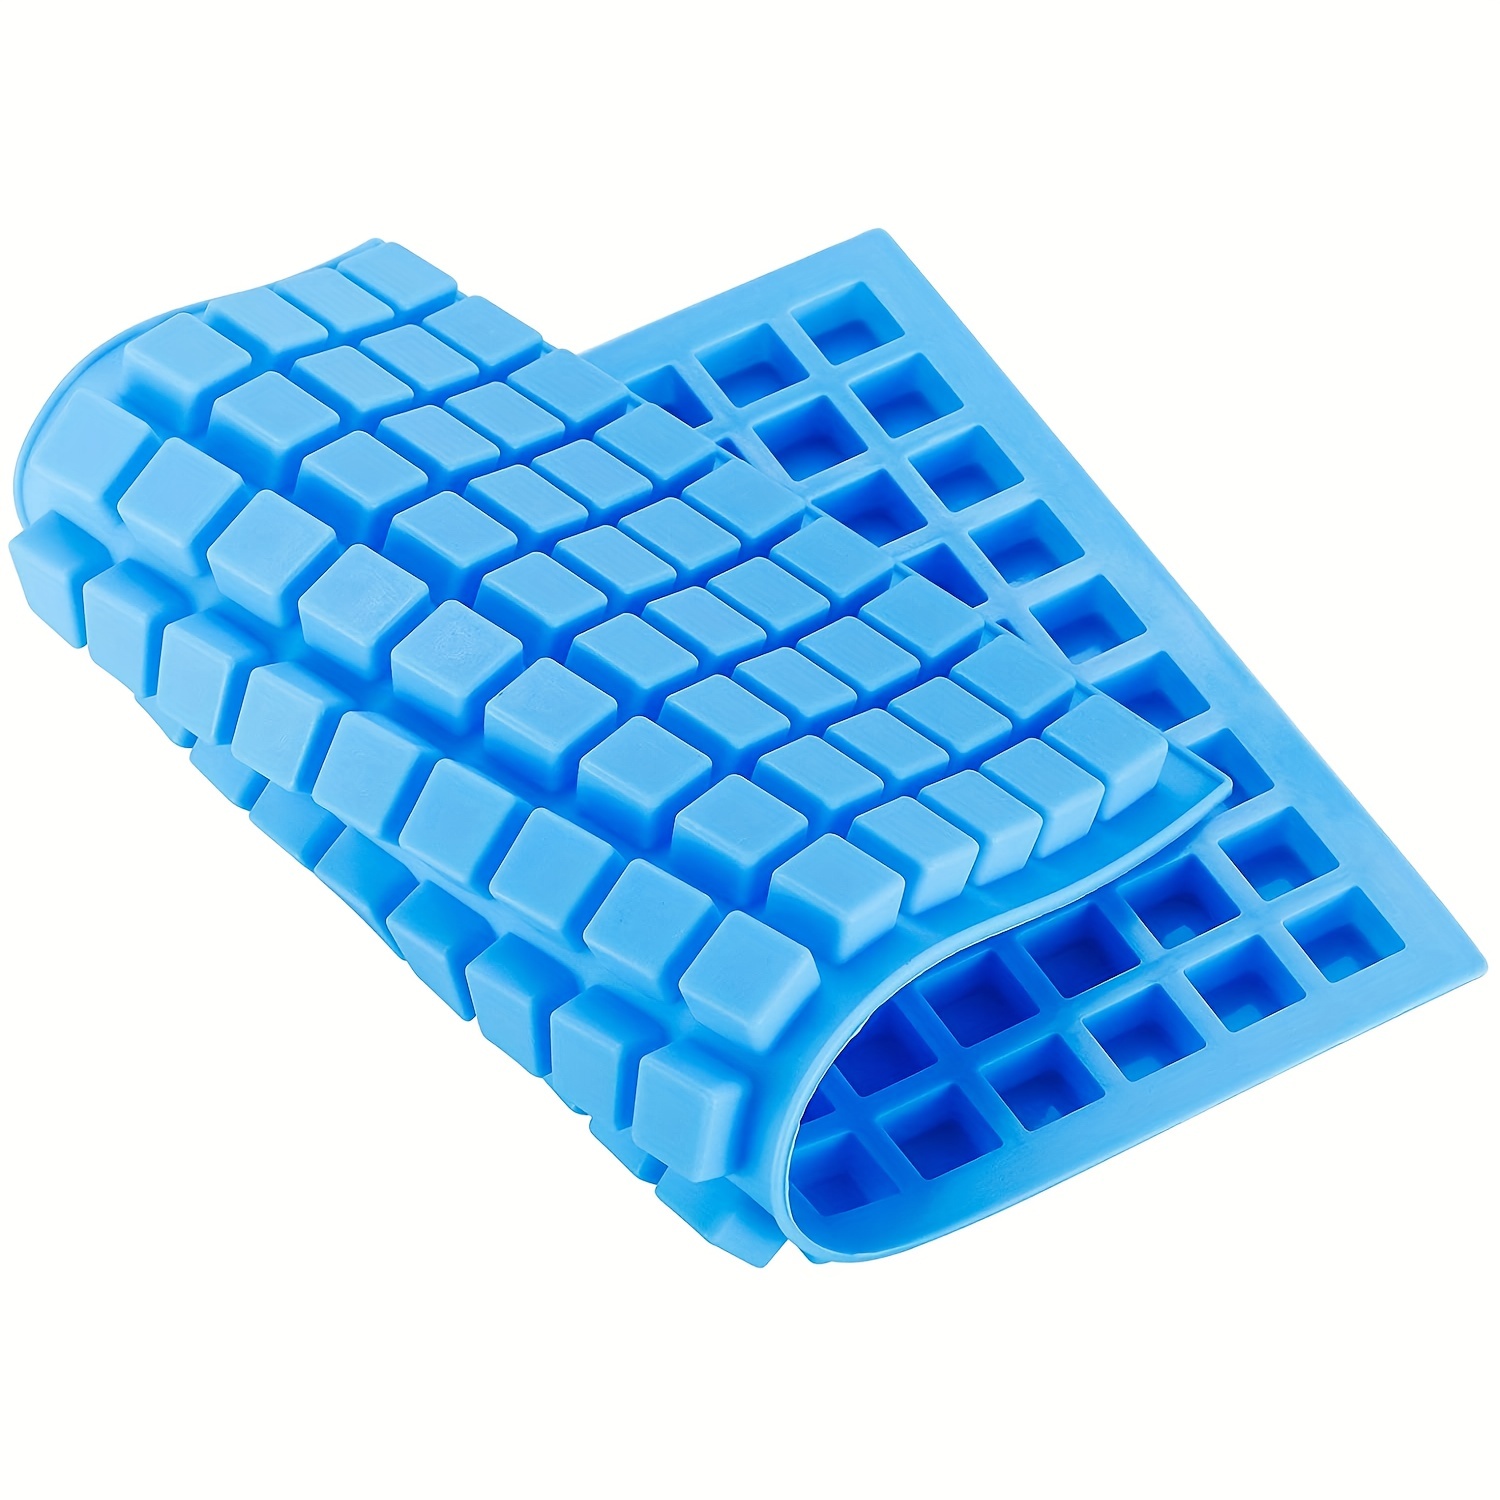 126 Cavity Square Candy Molds Silicone Mold for Hard Candy